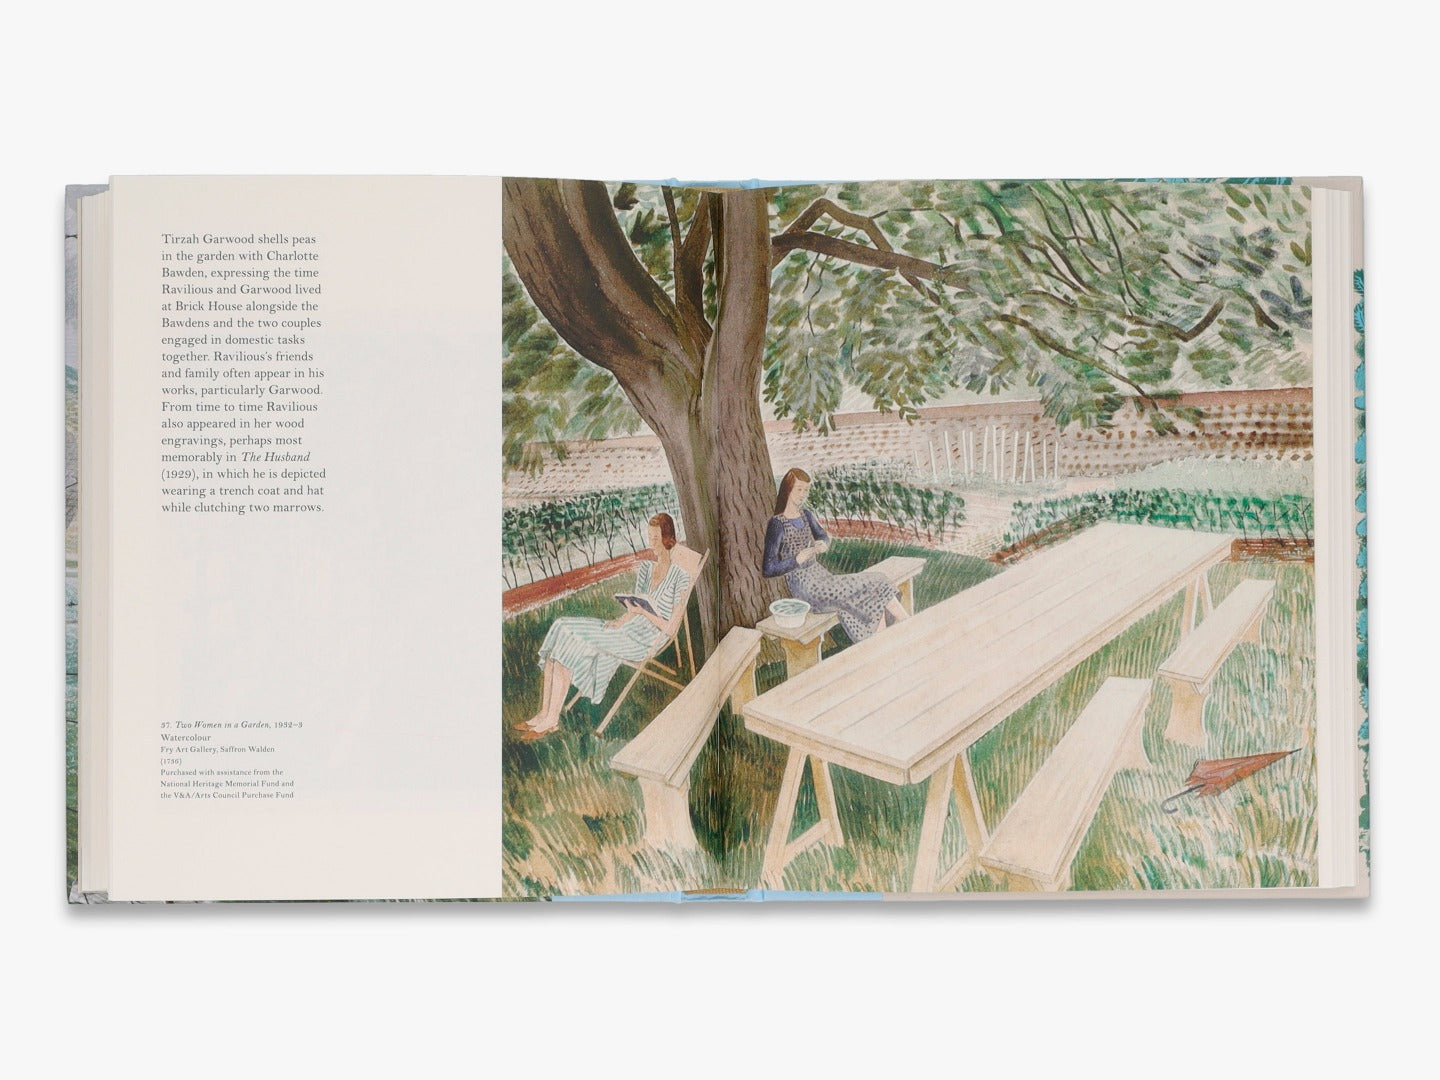 Page of 'Eric Ravilious: Landscapes & Nature' book with text and painting of two women in a garden